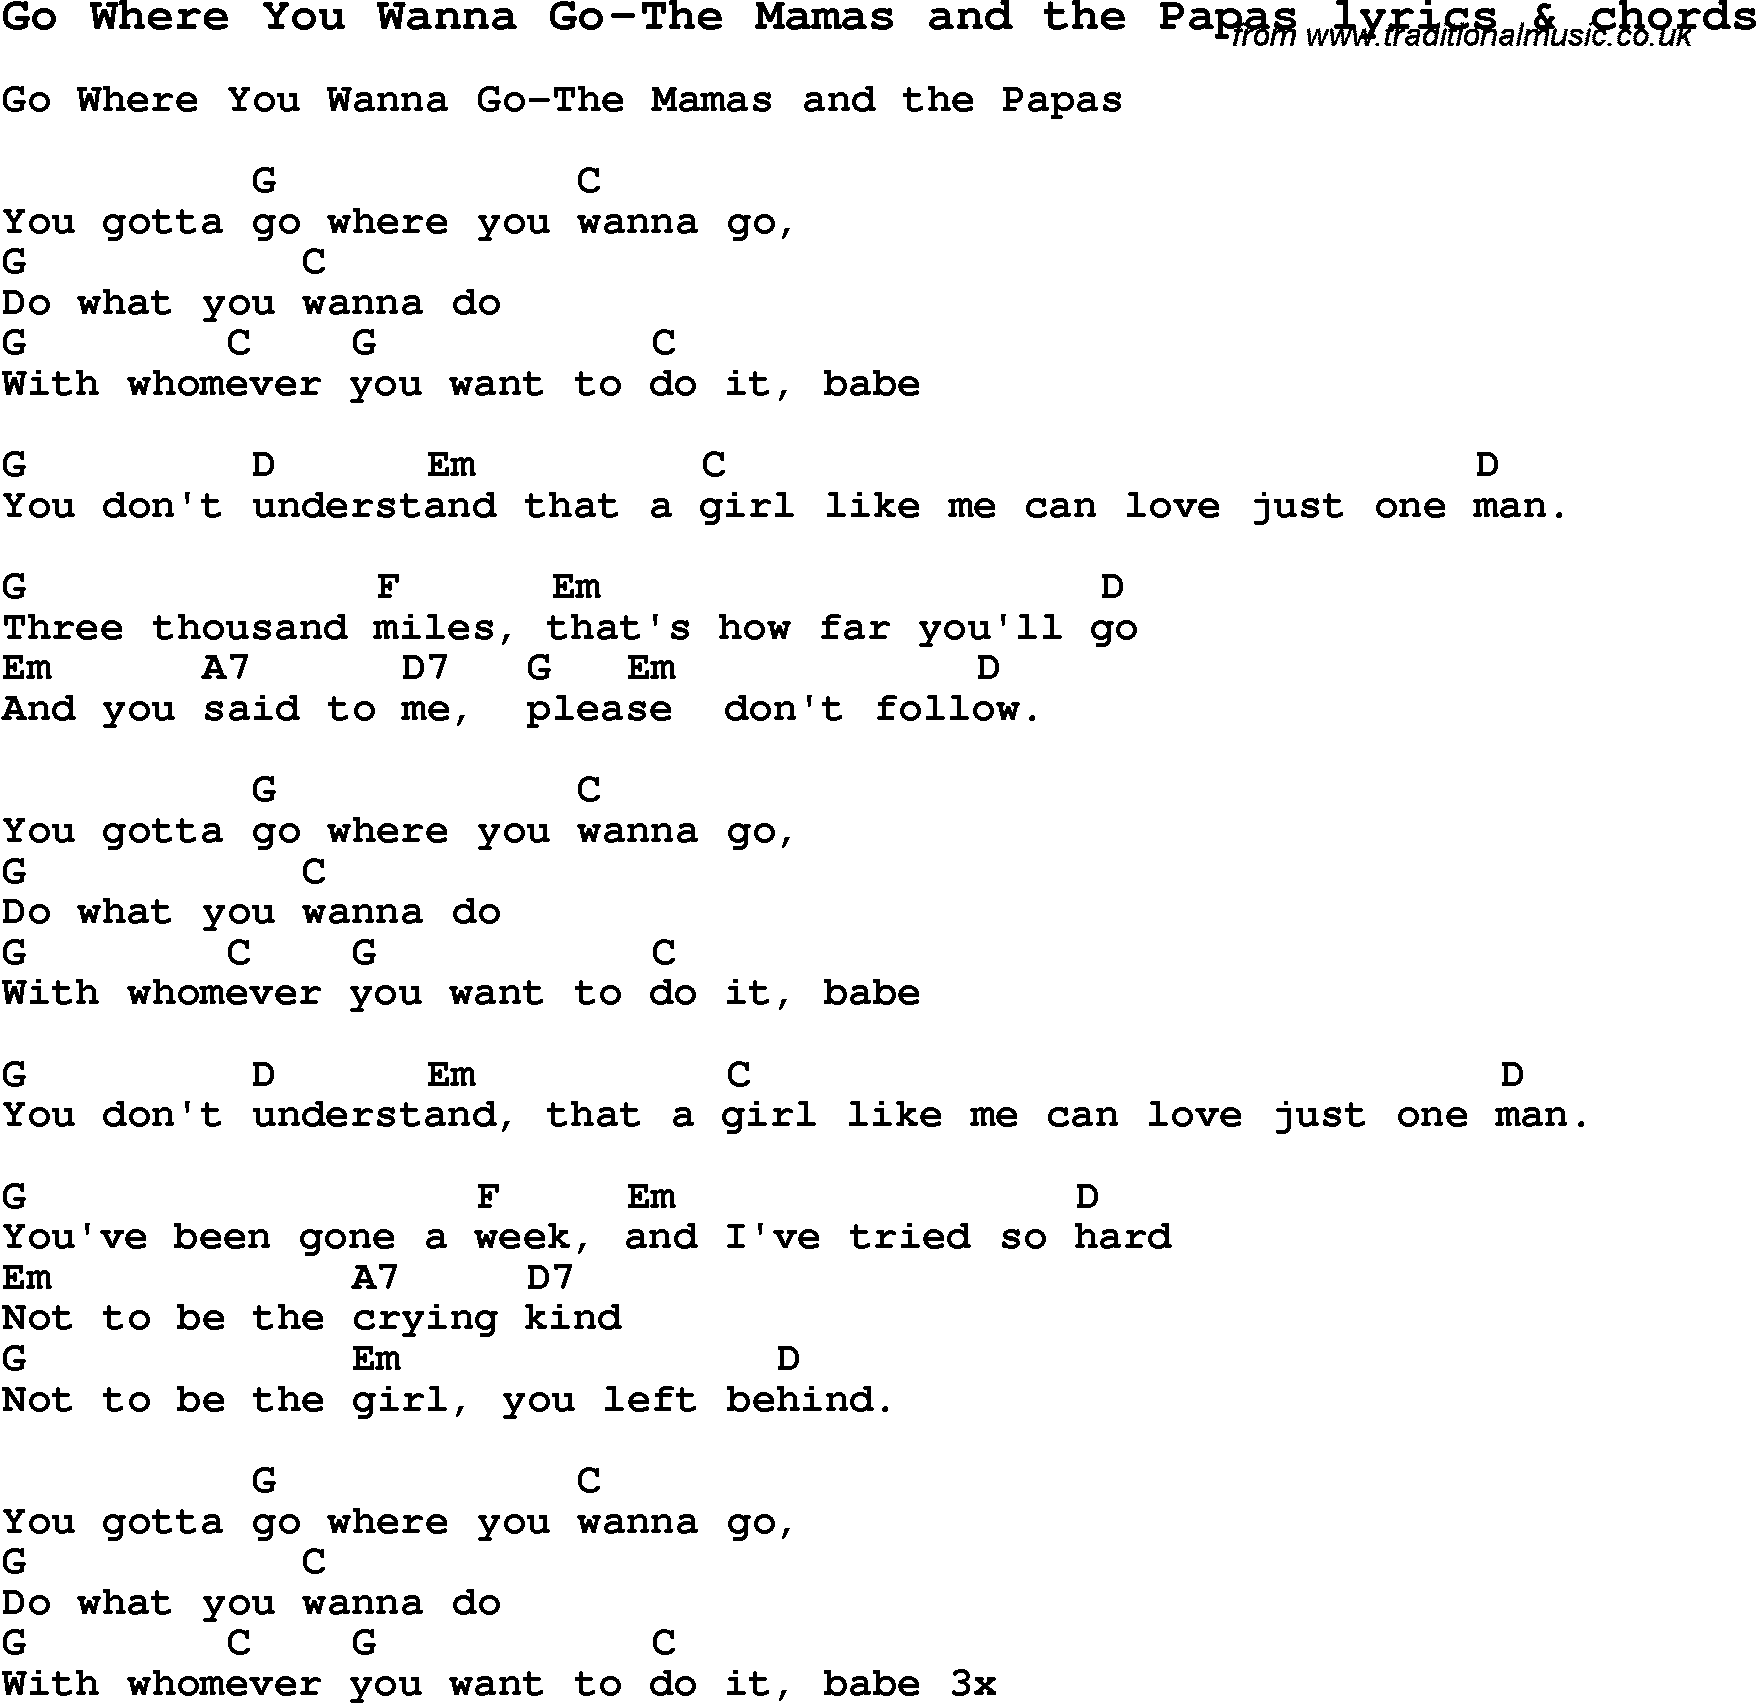 Love Song Lyrics for: Go Where You Wanna Go-The Mamas and the Papas with chords for Ukulele, Guitar Banjo etc.